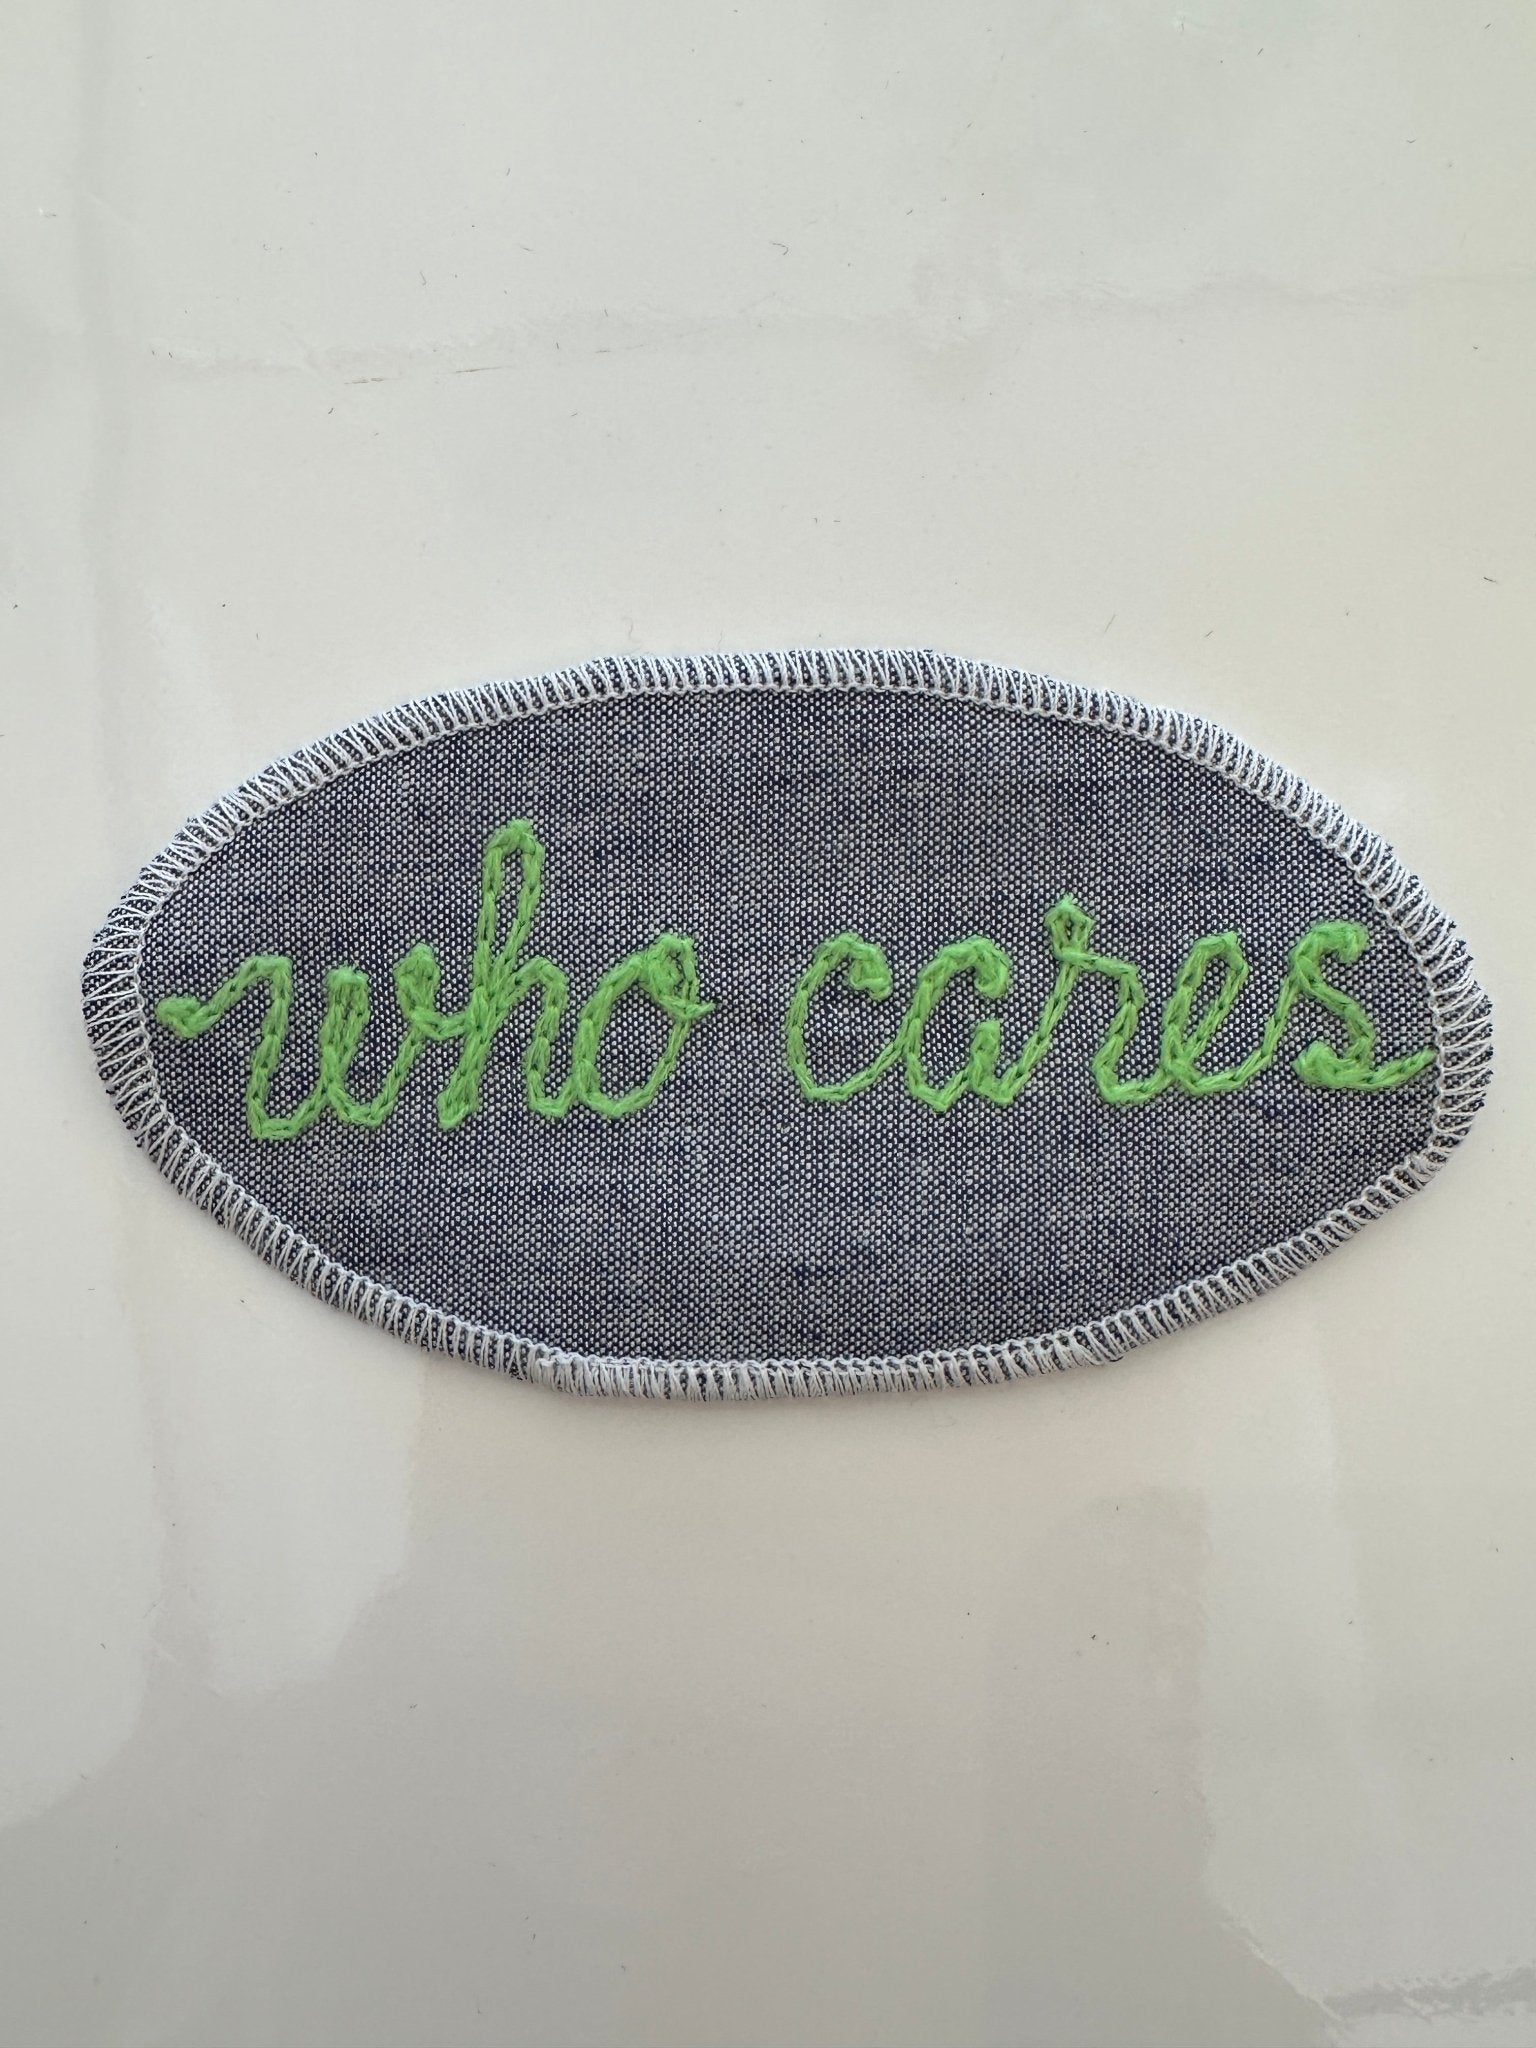 Cursive Words Hand Stitched Embroidery Patch - Joy